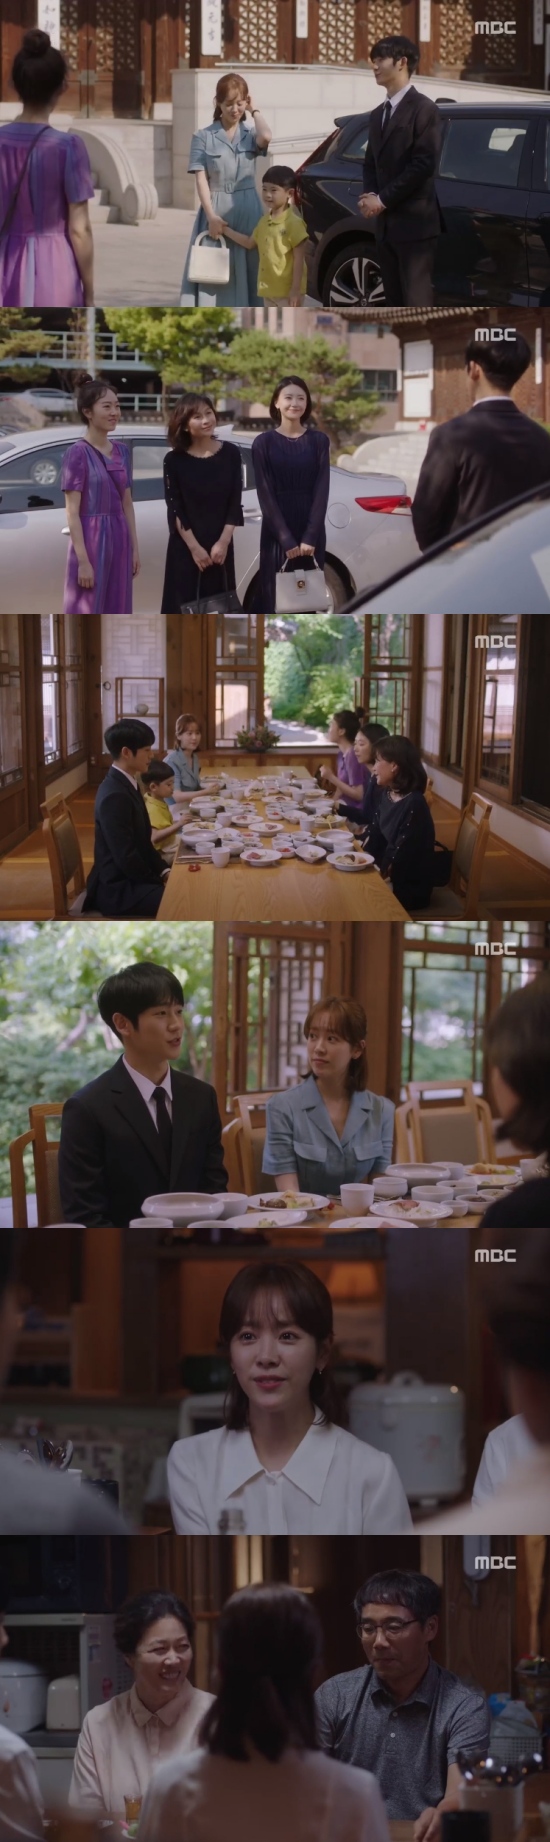 Spring Night Jung Hae-in and Han Ji-min slowly prepared for the wedding.In the 31st and 32nd MBC drama Spring Night broadcast on the 11th (final meeting), Yoo JiHo (Jeong Hae-in) and Lee Choi Jung-in (Han Ji-min) were shown promising to marry.I dont know exactly when, when Jung Eun-woo started seeing me, I had to endure it, and I controlled myself.My life, my actions, my words, my thoughts. Im lying if I never thought of that or the woman who gave birth to Jung Eun-woo.But its hard to believe, but I really have no feelings. I was sad sometimes. I could not hold on to the day I was drunk. Lee Choi Jung-in said, Jung Eun-woo also said, but JiHo wanted to comfort himself. Yoo JiHo said, Thank you.Lee Choi Jung-in apologized, saying, Thank you, I would have been sad, but I understood my heart.Lee Choi Jung-in then headed to Yoo JiHos home, and received a memorandum stating that he would only drink once a month; Lee Choi Jung-in said, Absolutely abstinence.I can not marry Choi Jung-in in case of violation. Yoo JiHo wrote a memorandum and hung it in his house.Yoo JiHo also met with Yoo Jung Eun-woo (Hyan) and Lee Jung-ins family.Lee Tae-hak (Song Seung-hwan) did not attend, but Shin Hyung-sun (Gil Hae-yeon), Lee Seo-in (Lim Sung-eon) and Lee Jae-in (Jomin Kyung) accepted Yoo JiHo as well as Yoo Eun-woo as a family.The new line said, I expect, but Choi Jung-in said Father is a long way to go. Yoo JiHo said, I am getting ready.Im fine, but Im afraid Choi Jung-in will be hard. Choi Jung-in said, Ill get through it.Father, Im going to wait as long as I can, and Im keeping in mind what my mother said, and I can have moments of regret and things I never thought of.But its okay. Ill have Mr. JiHo next to me. Ill be happy again soon, pouring everything into Mr. JiHo and comforting him. Lee Choi Jung-in also went to say hello to Yoo JiHos house, which said, I like Mr. JiHo more, and at first I tried not to even meet me.Ill tell you this before we get drunk. I know youre worried. But I hope youre less. Well be pretty.And I will do my best as much as I can to Jung Eun-woo, and Ko Sook-hee (Kim Jung-young) burst into tears.Especially, Yoo JiHo and Choi Jung-in completed Happy Endings in a happy way in a calm daily life. / Photo = MBC broadcast screen